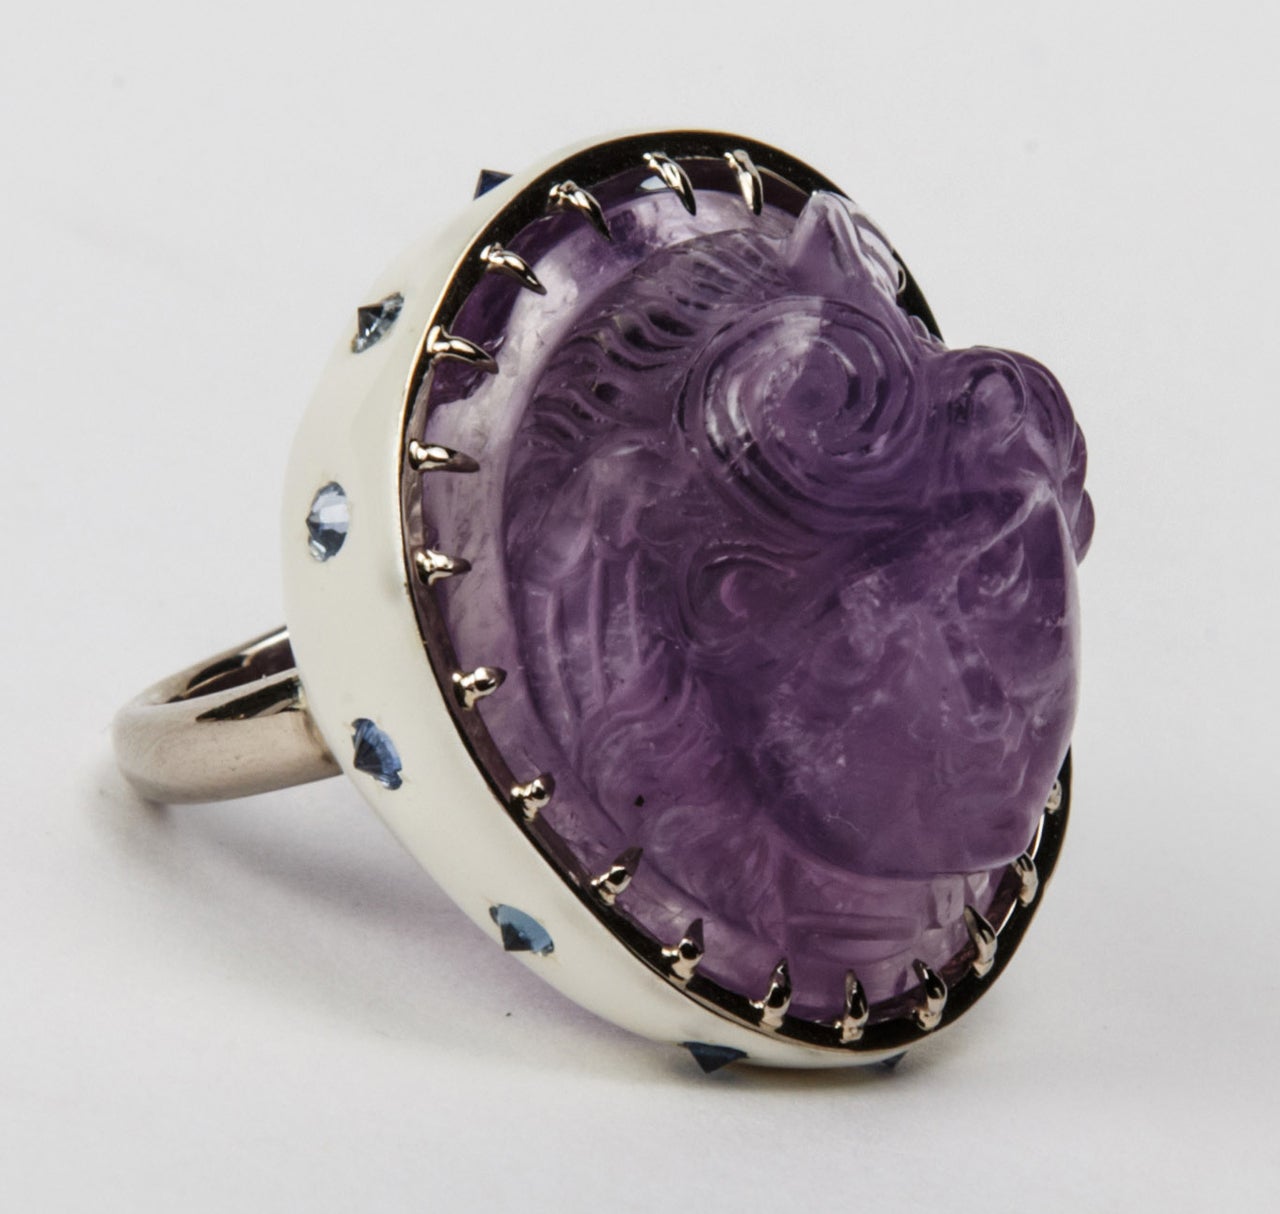 Ring in 18K white gold, partially lacquered in white, set with small sapphires, culet-up, centering an important amethyst carving of a head of Eros, 18th century work in the antique taste.
The carving is an original antique; the mounting is a